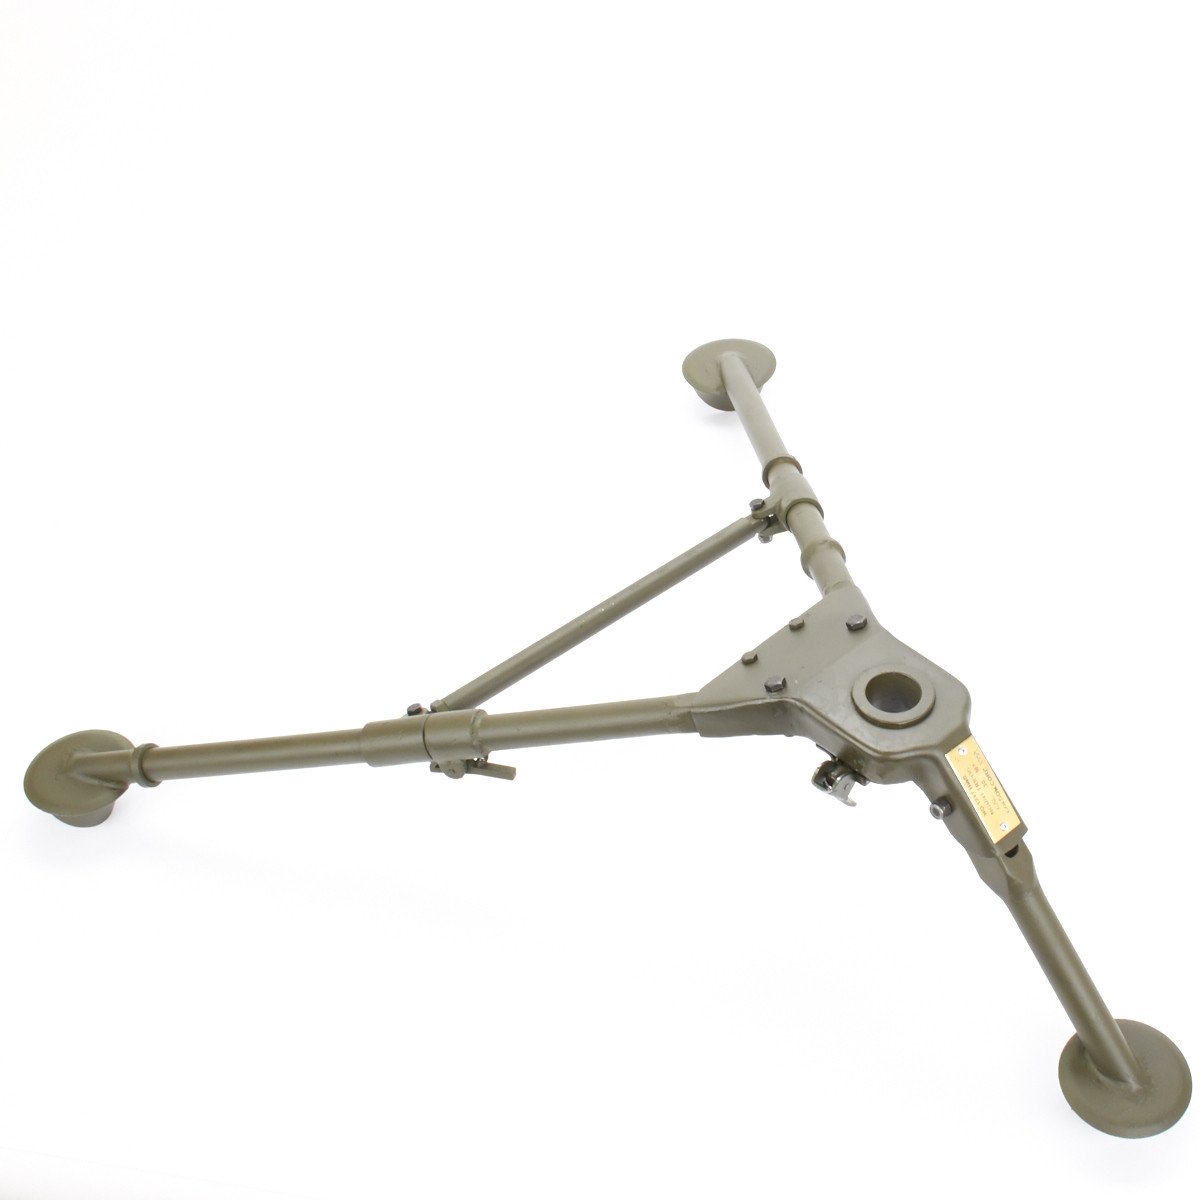 U.S. Browning M1919A4 .30 cal M2 Tripod with Pintle and T&E